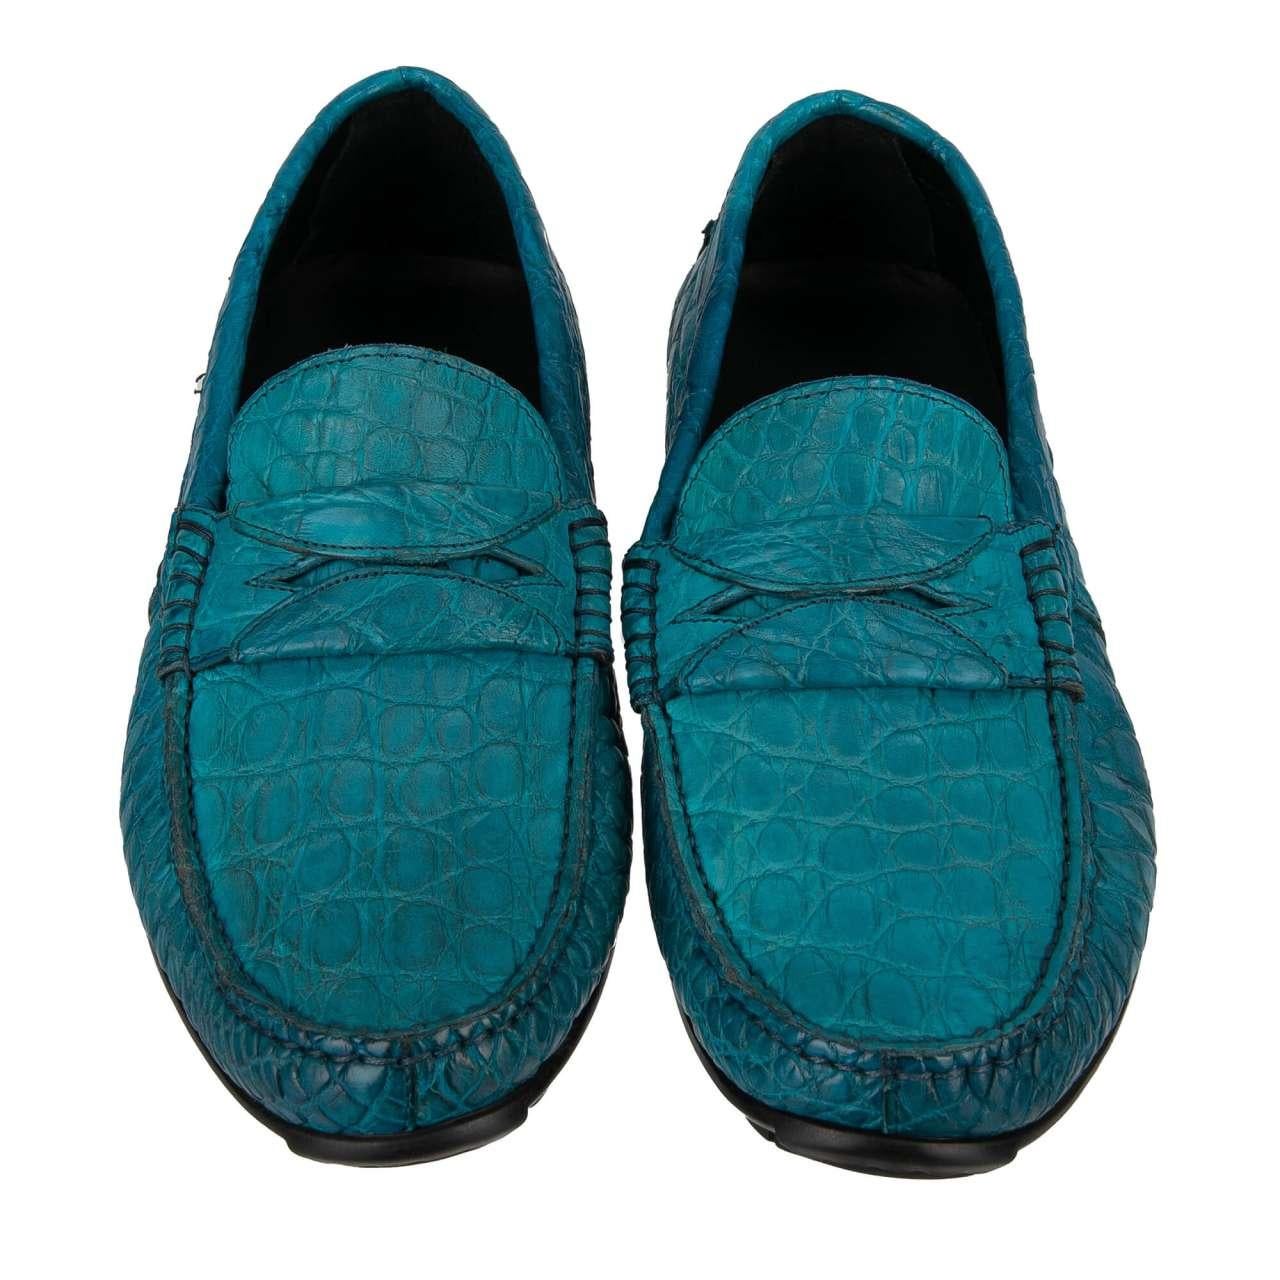 D&G - Caiman Leather Moccasins Loafer Shoes RAGUSA Turquoise Blue EUR 40 In Excellent Condition For Sale In Erkrath, DE